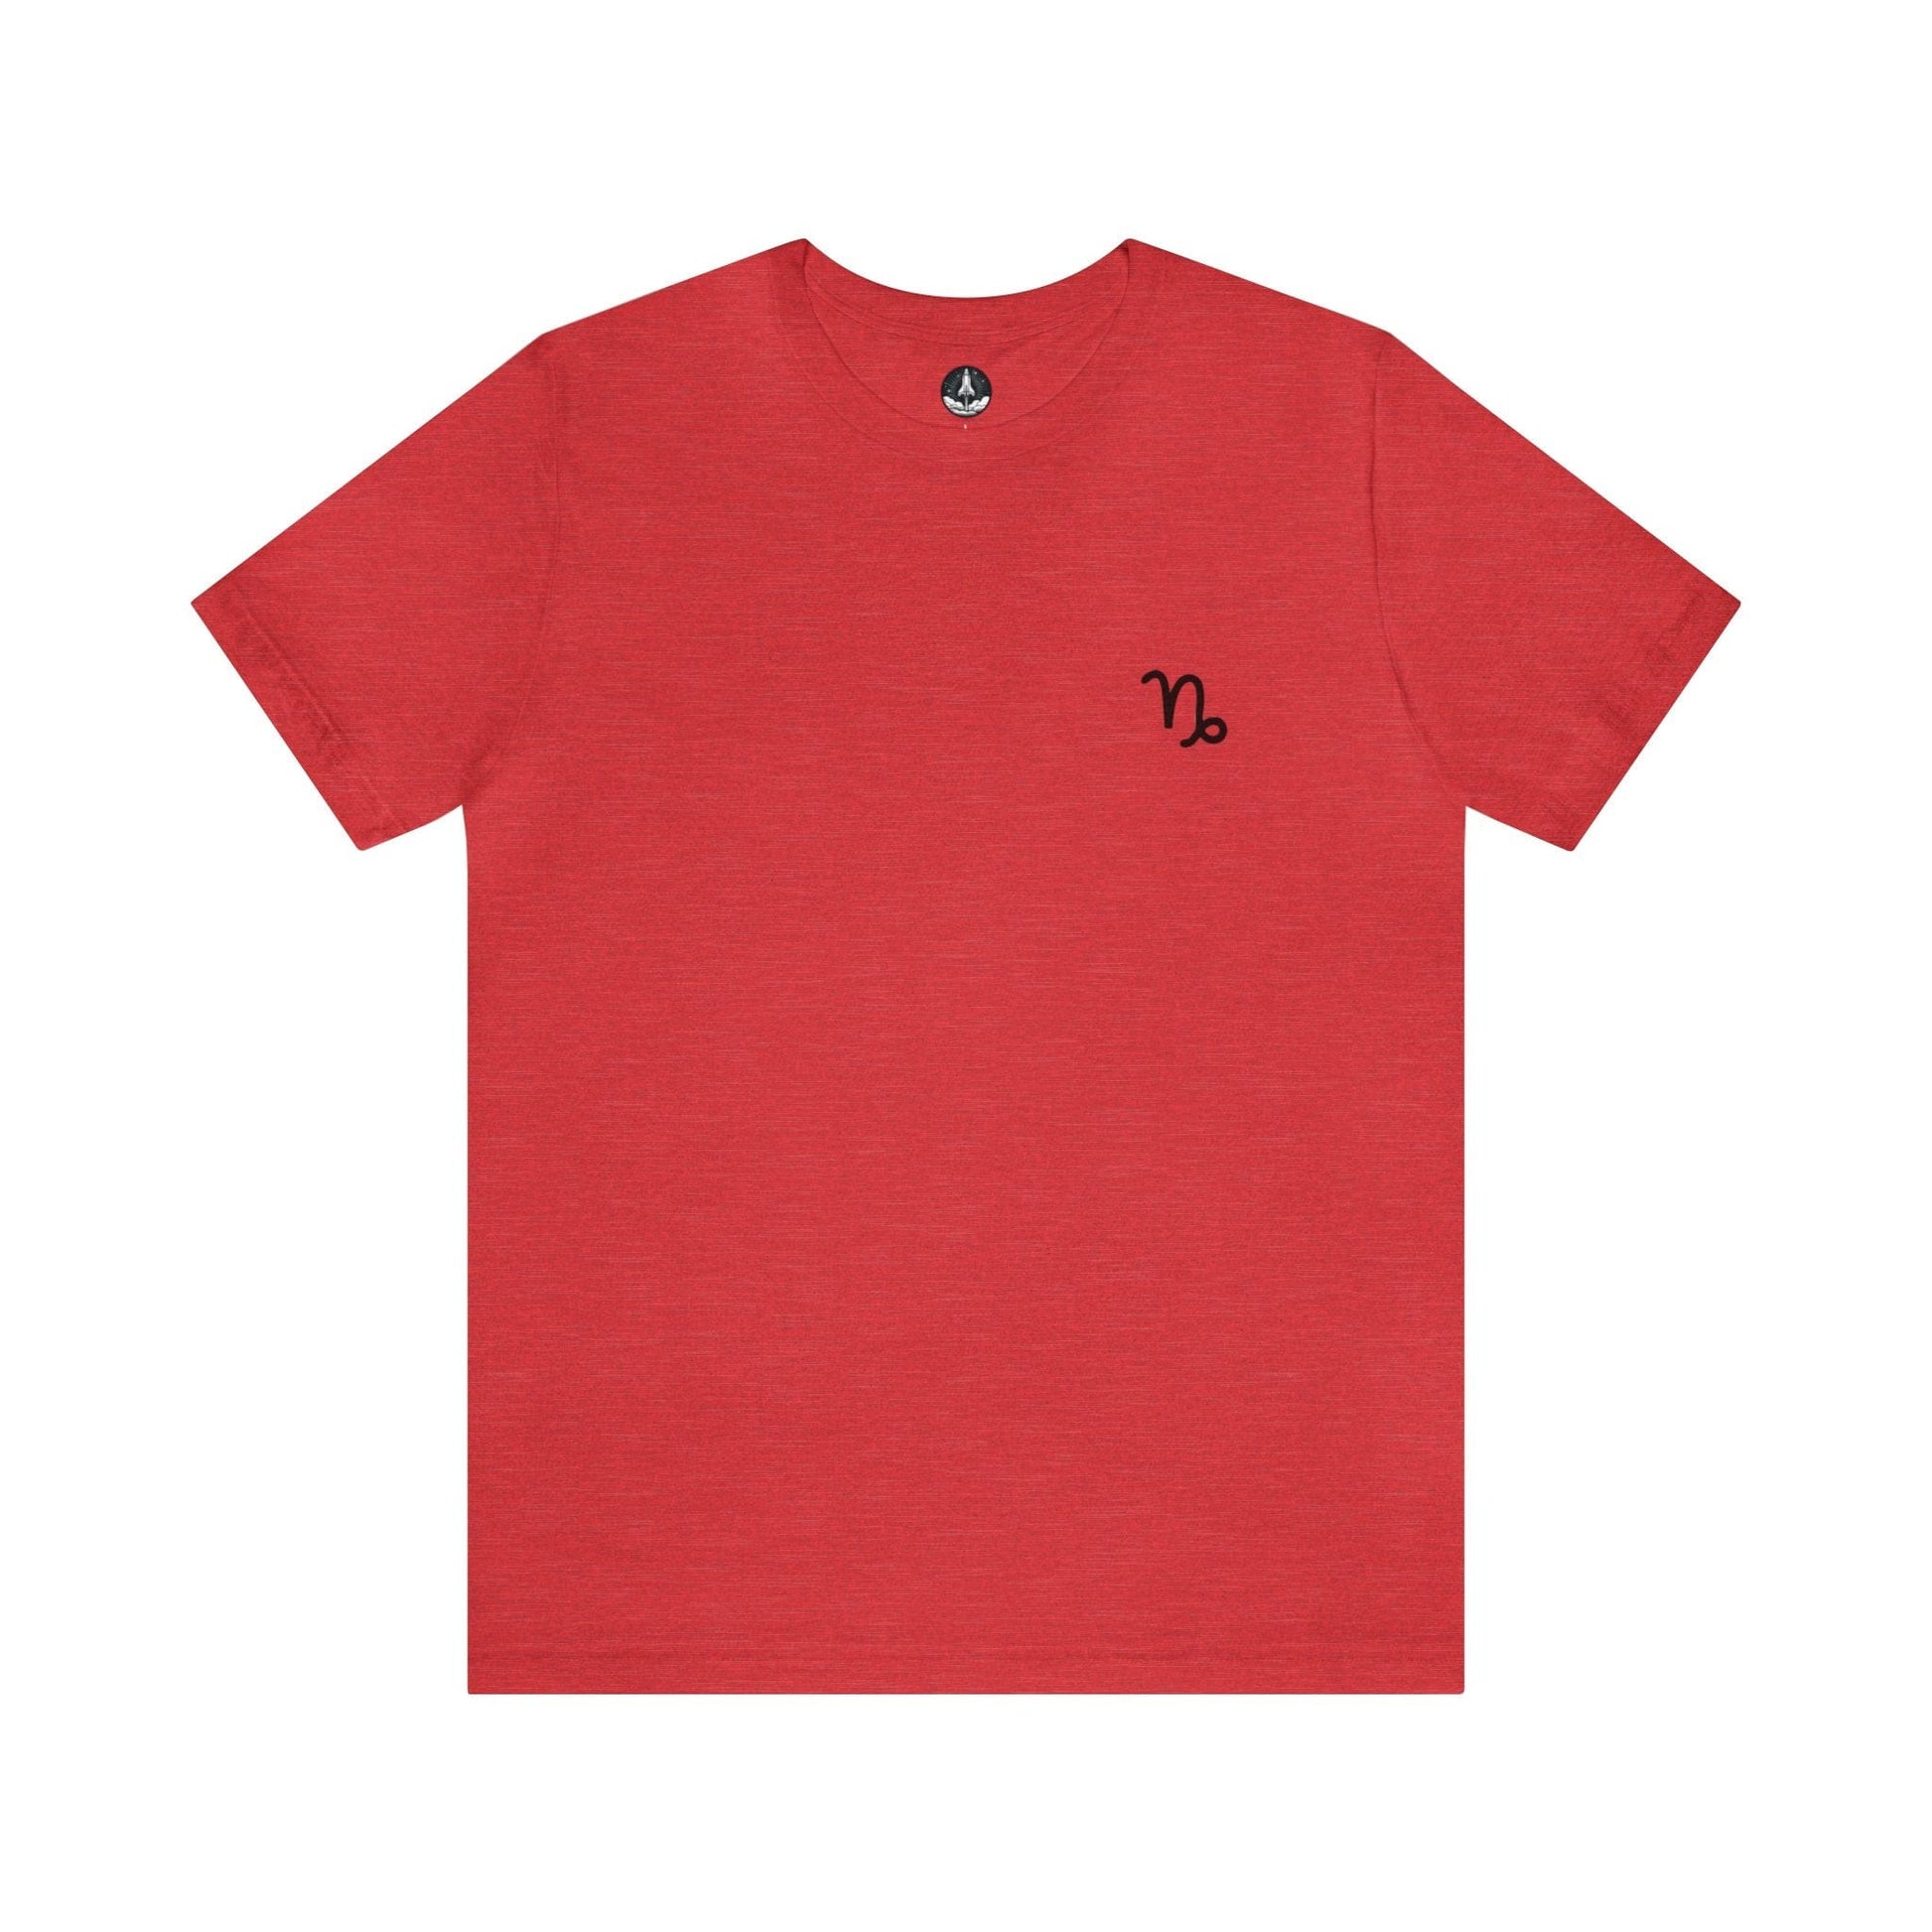 T-Shirt Heather Red / S Capricorn Mountain Glyph T-Shirt: Peak Style for the Determined Climber